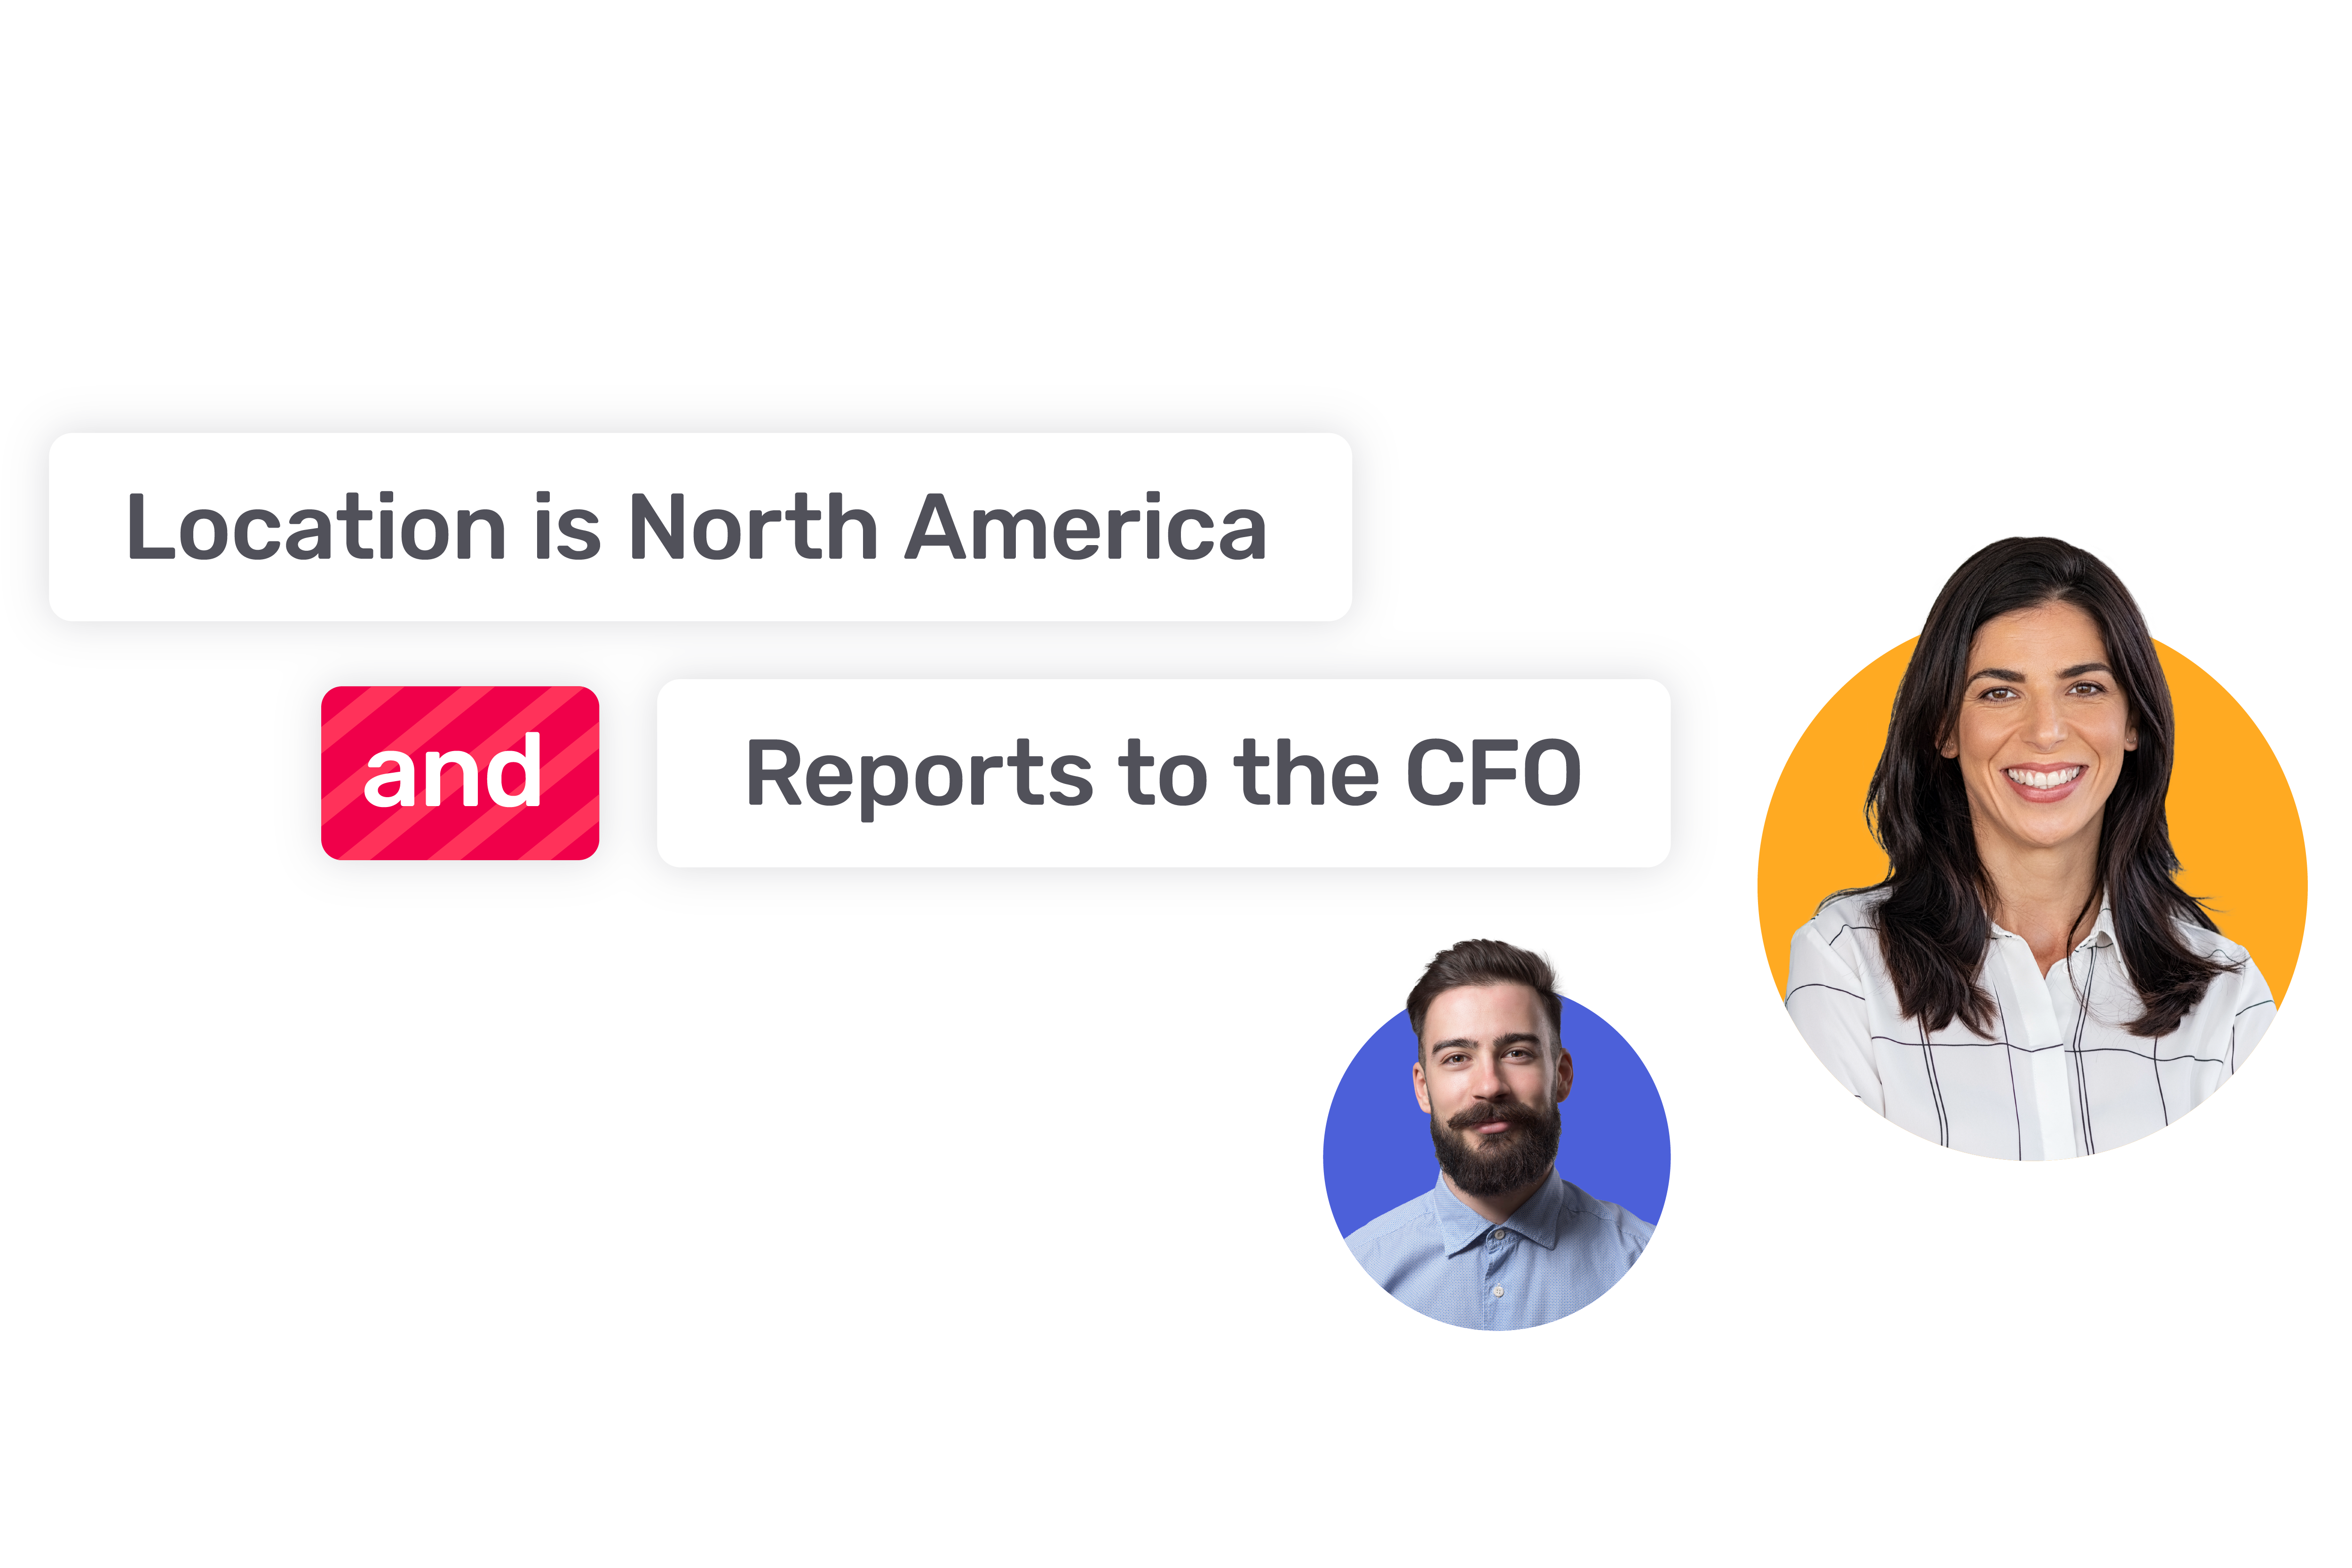 Two employees who are in the segment where the location is North America and they report to the CFO